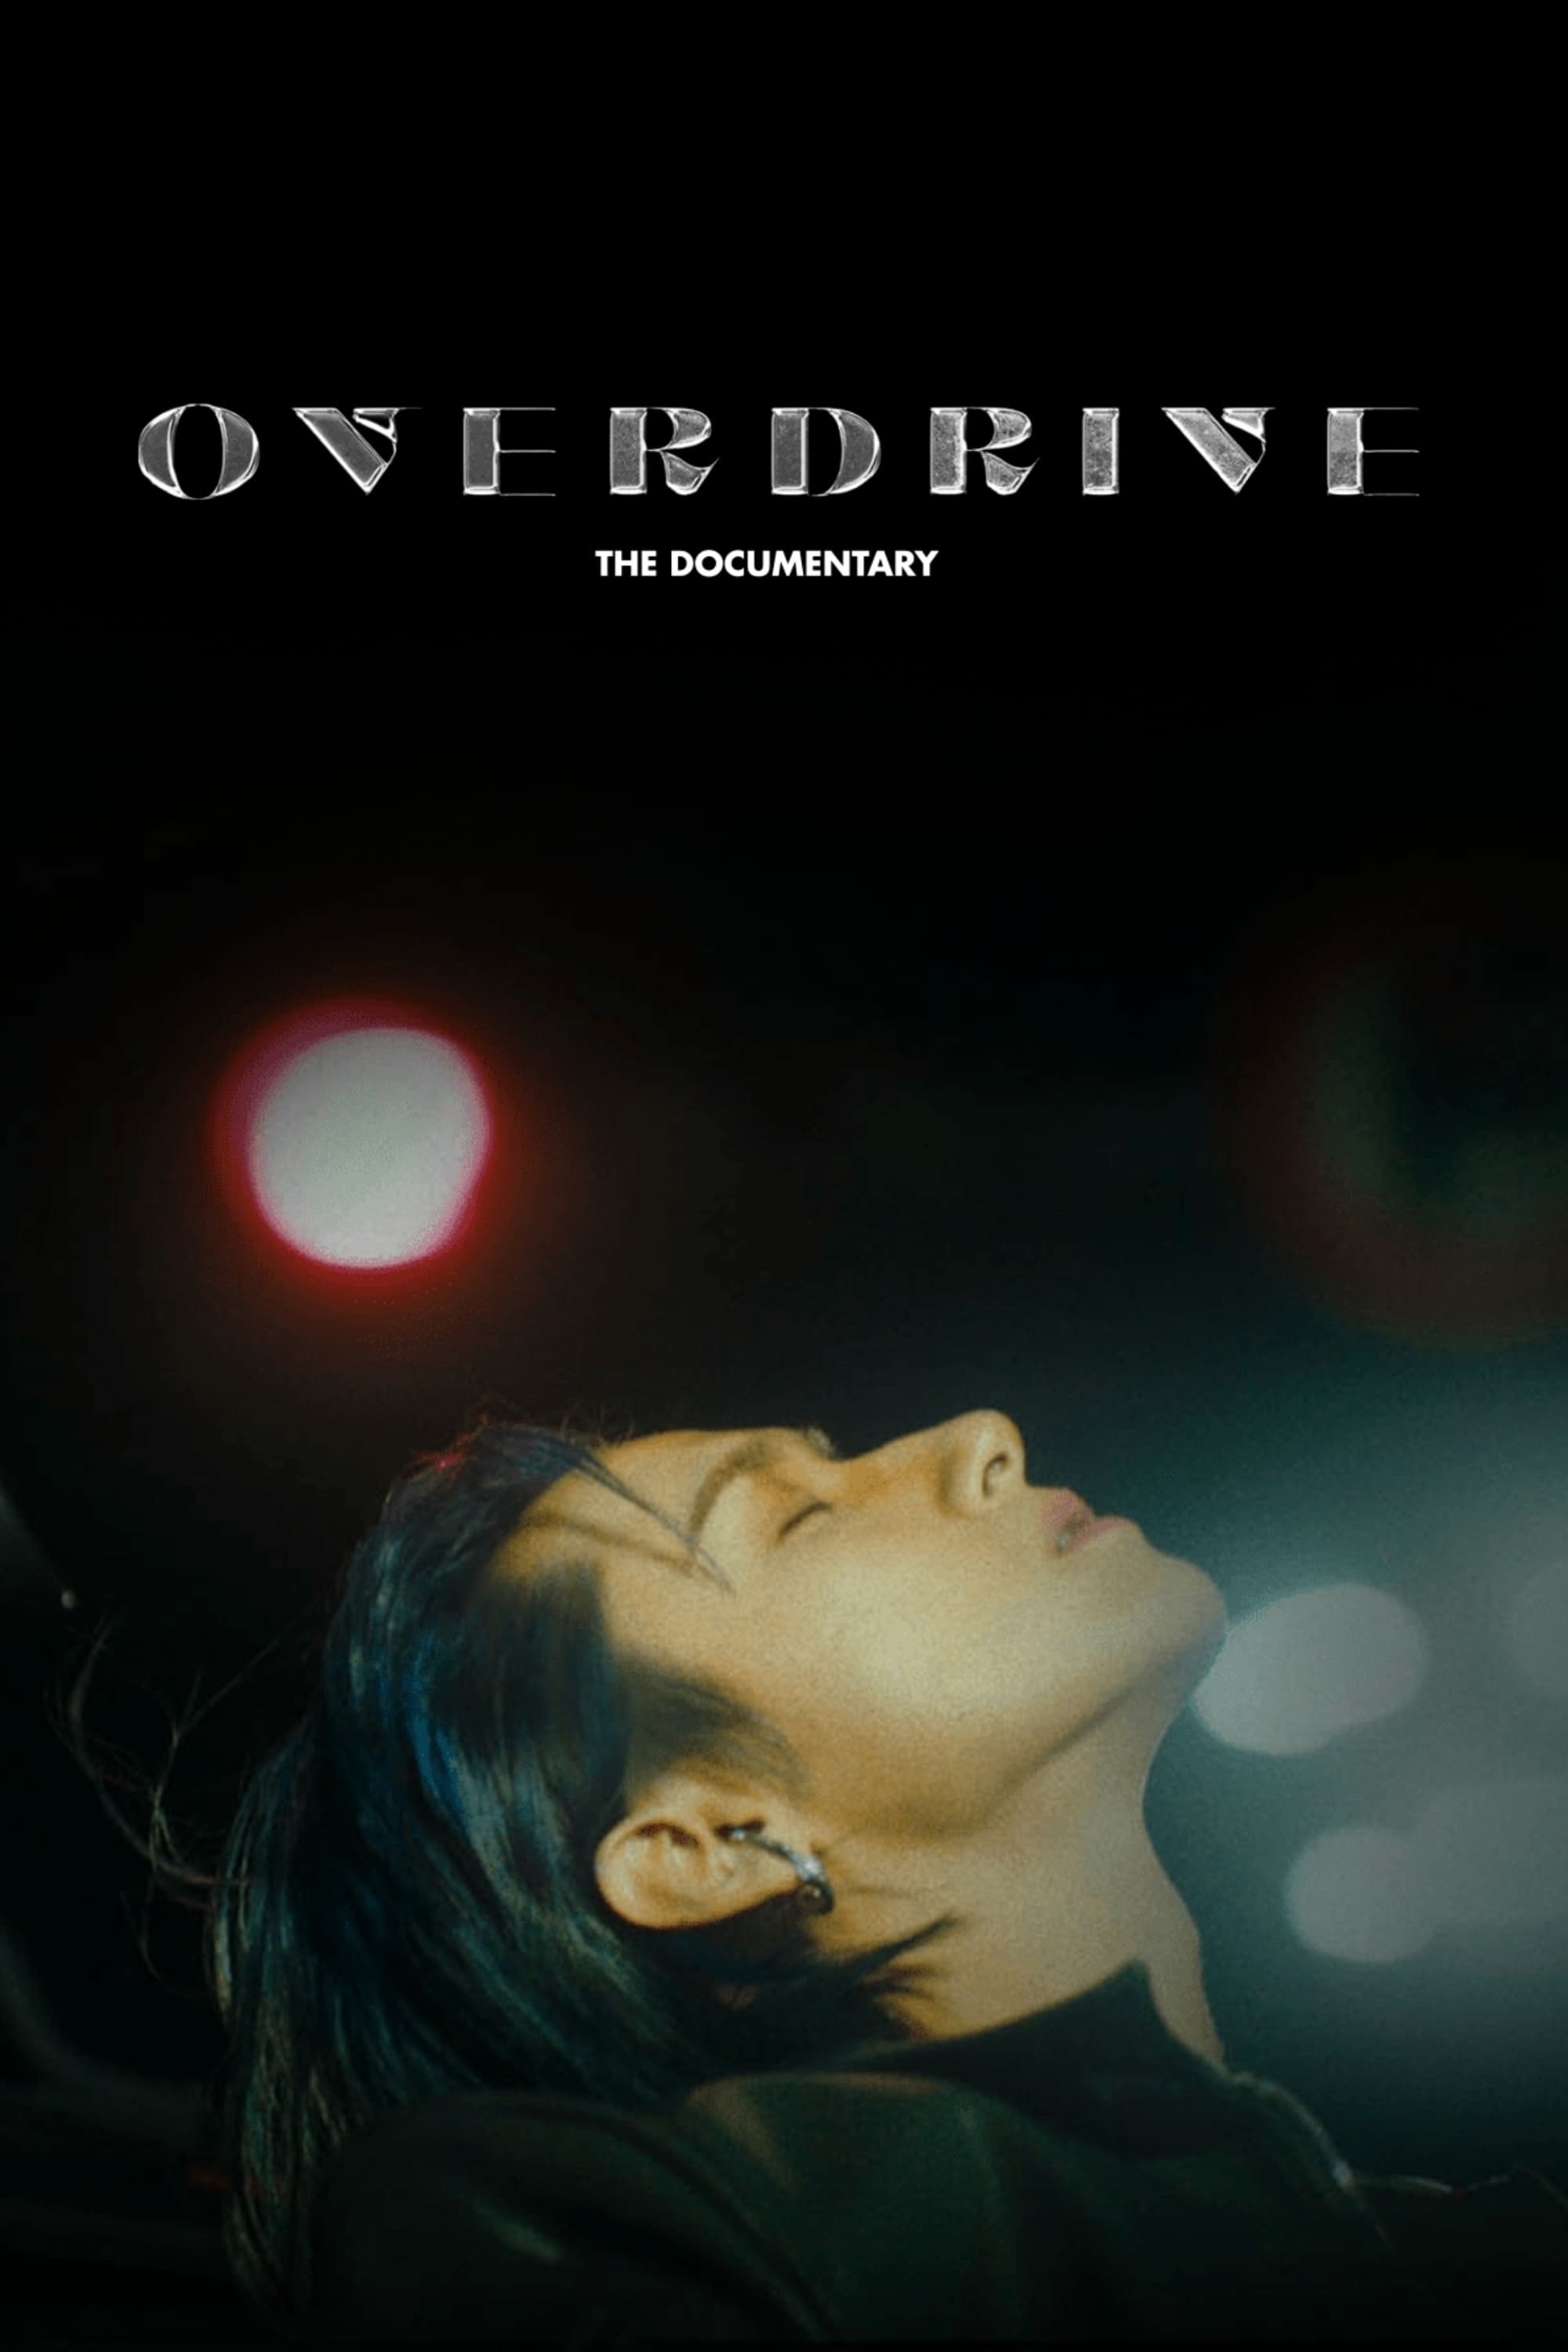 OVERDRIVE: THE DOCUMENTARY